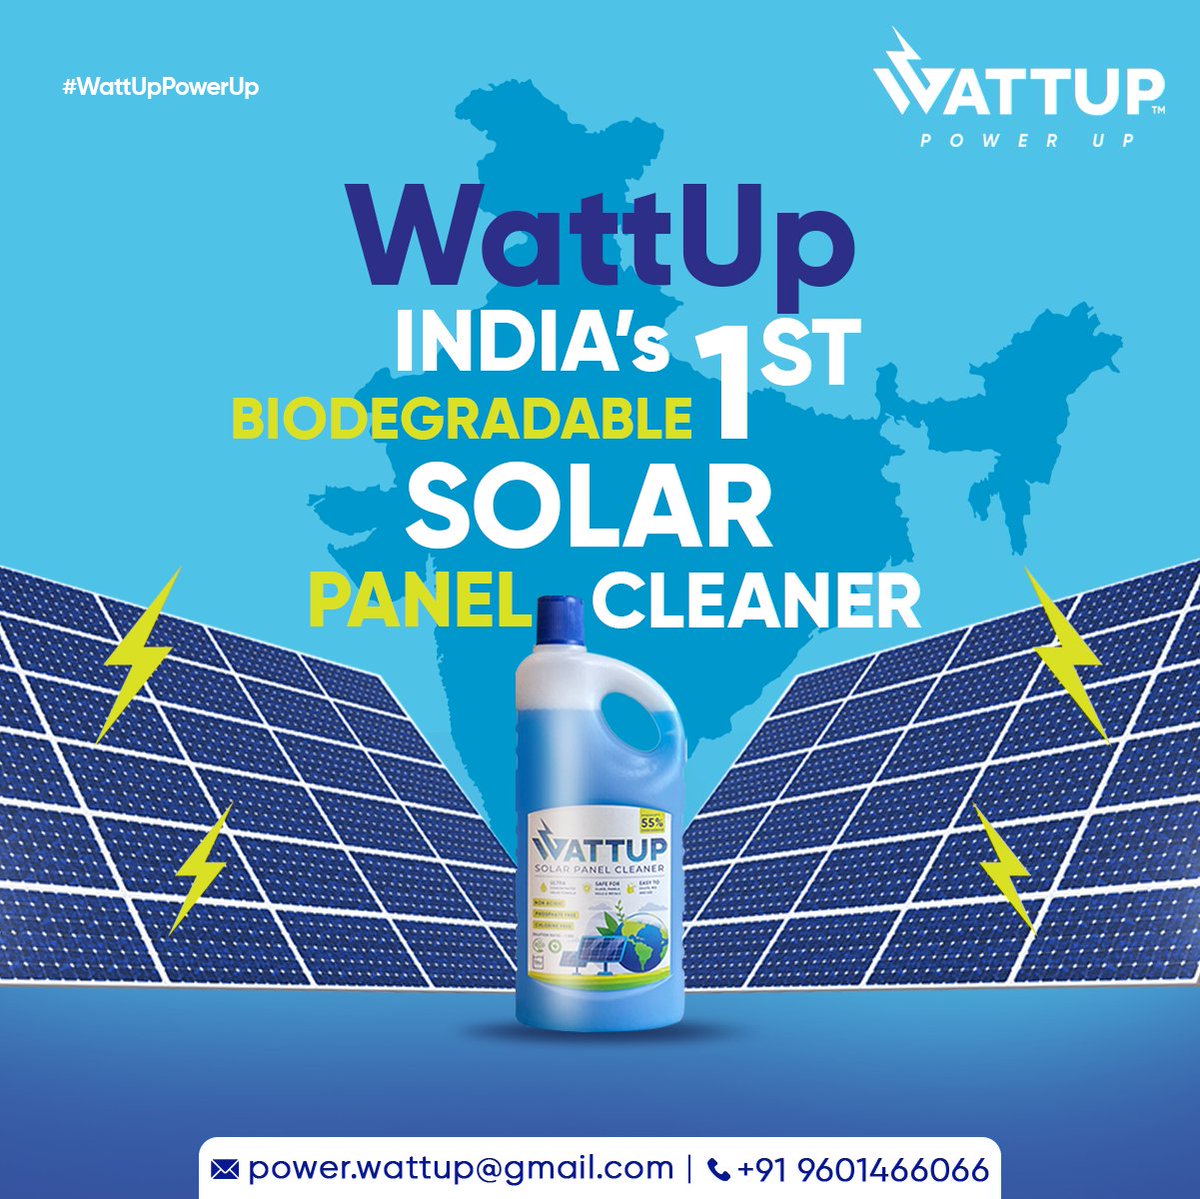 India’s first biodegradable solar panel cleaner, paving the way for sustainable energy solutions.

#WattUp #WattUpSolution #PowerWattup #SolarPanelCleaning #RenewableEnergy #EnergyEfficiency #CleanEnergy #SolarMaintenance #GreenEnergy #EnergyReturns #SustainablePower #Maximize